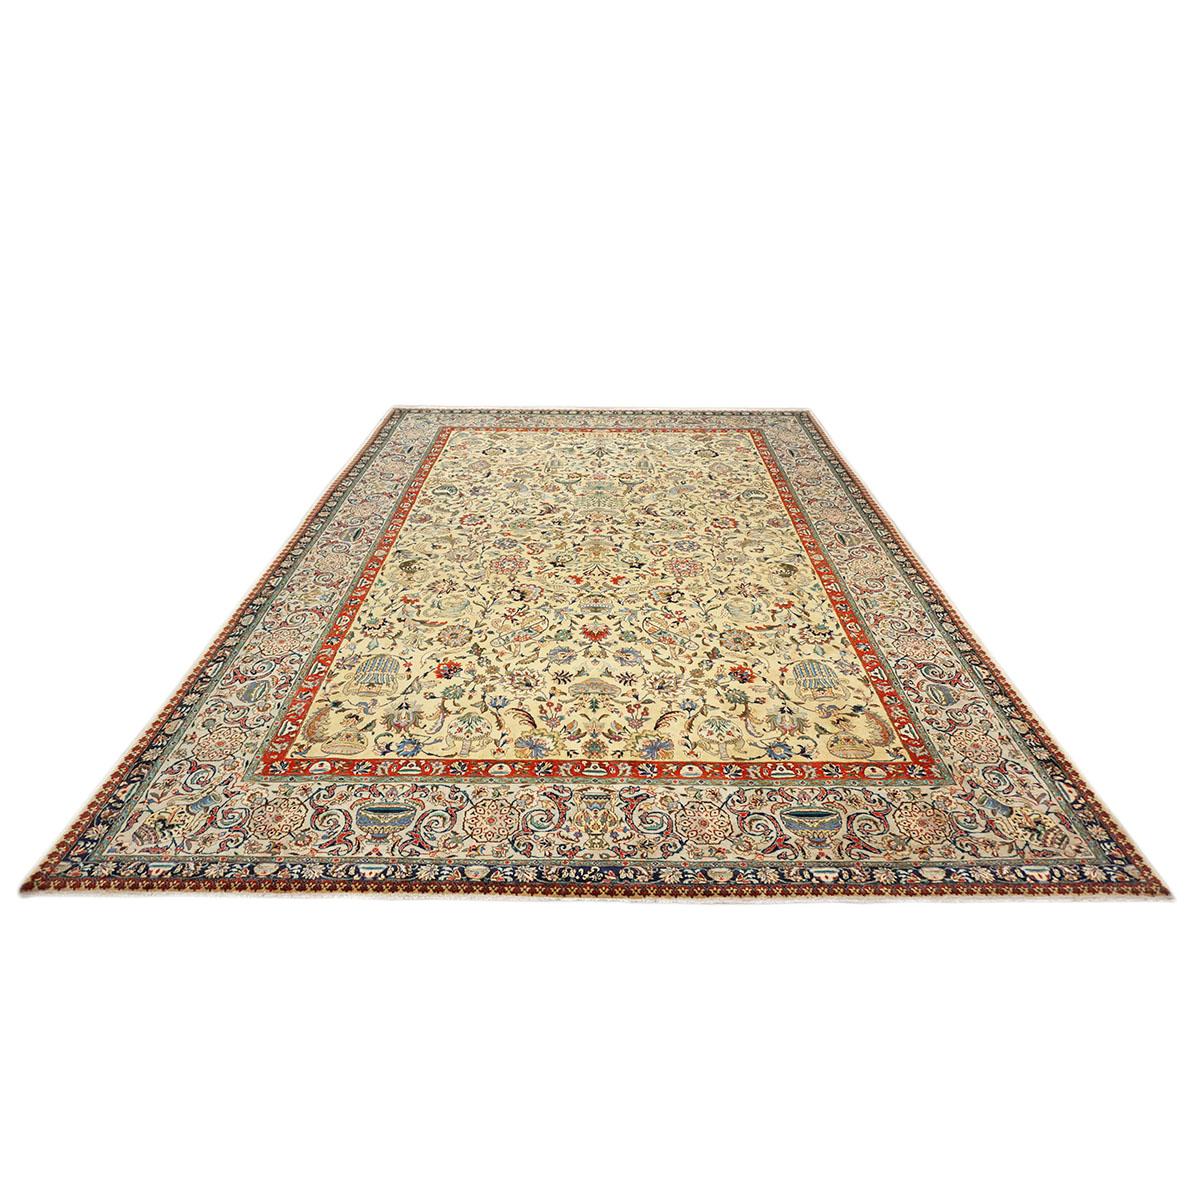 Ashly Fine Rugs presents a 1940s Antique Persian Tabriz. Tabriz is a northern city in modern-day Iran and has forever been famous for the fineness and craftsmanship of its handmade rugs. This piece has a light gold-colored background with design,